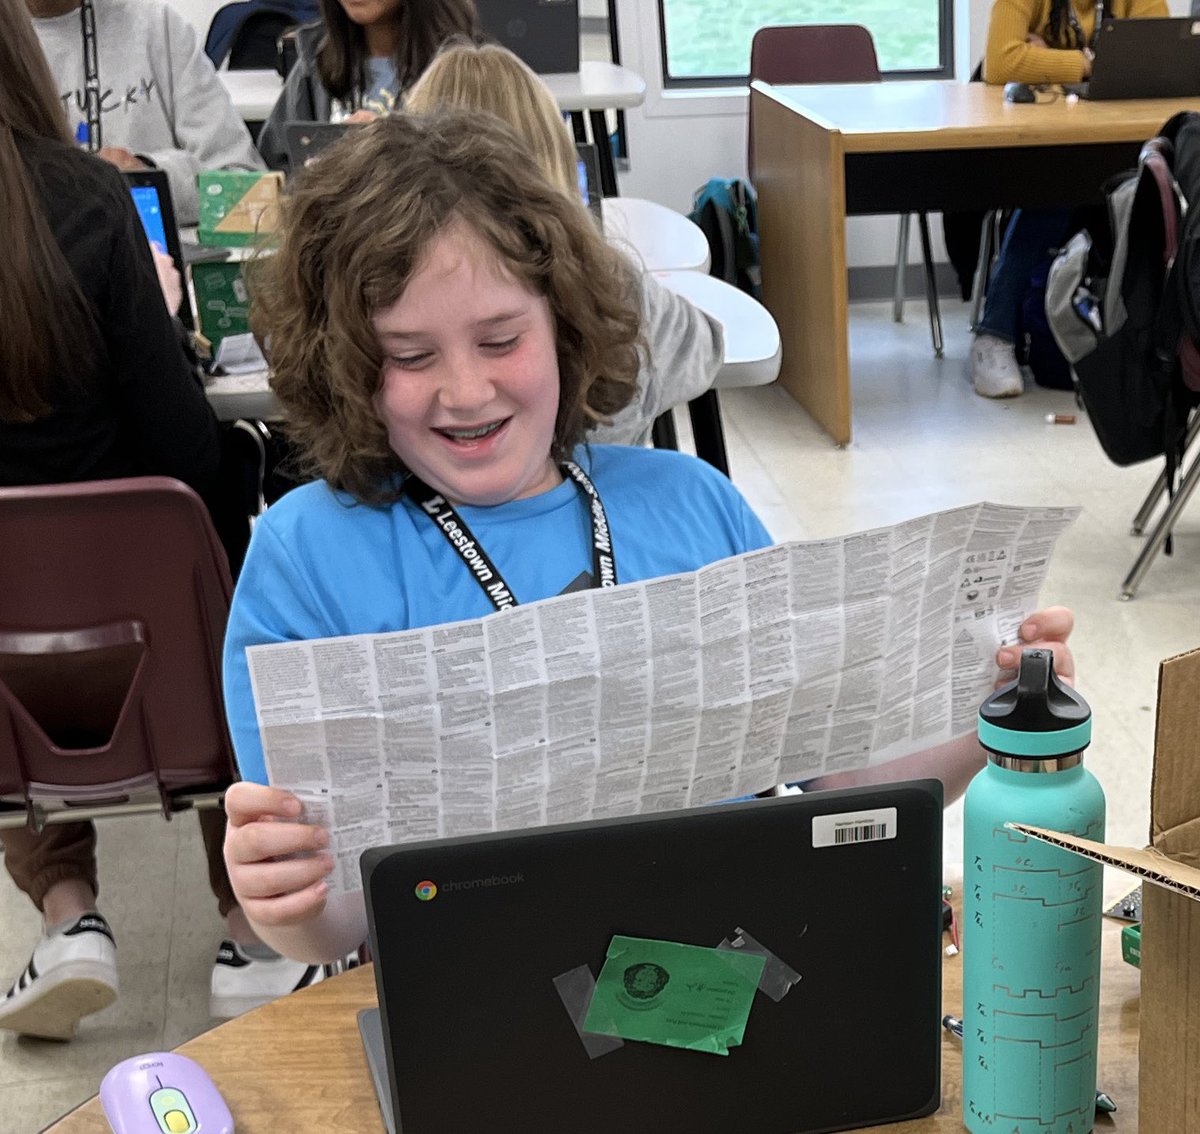 Our new micro:bits are here! Students are busy brainstorming ideas for our Leestown Museum of micro:bits. Thanks to @fcpskycte for all the help with Perkins funding. @fcpsoit @microbit_edu